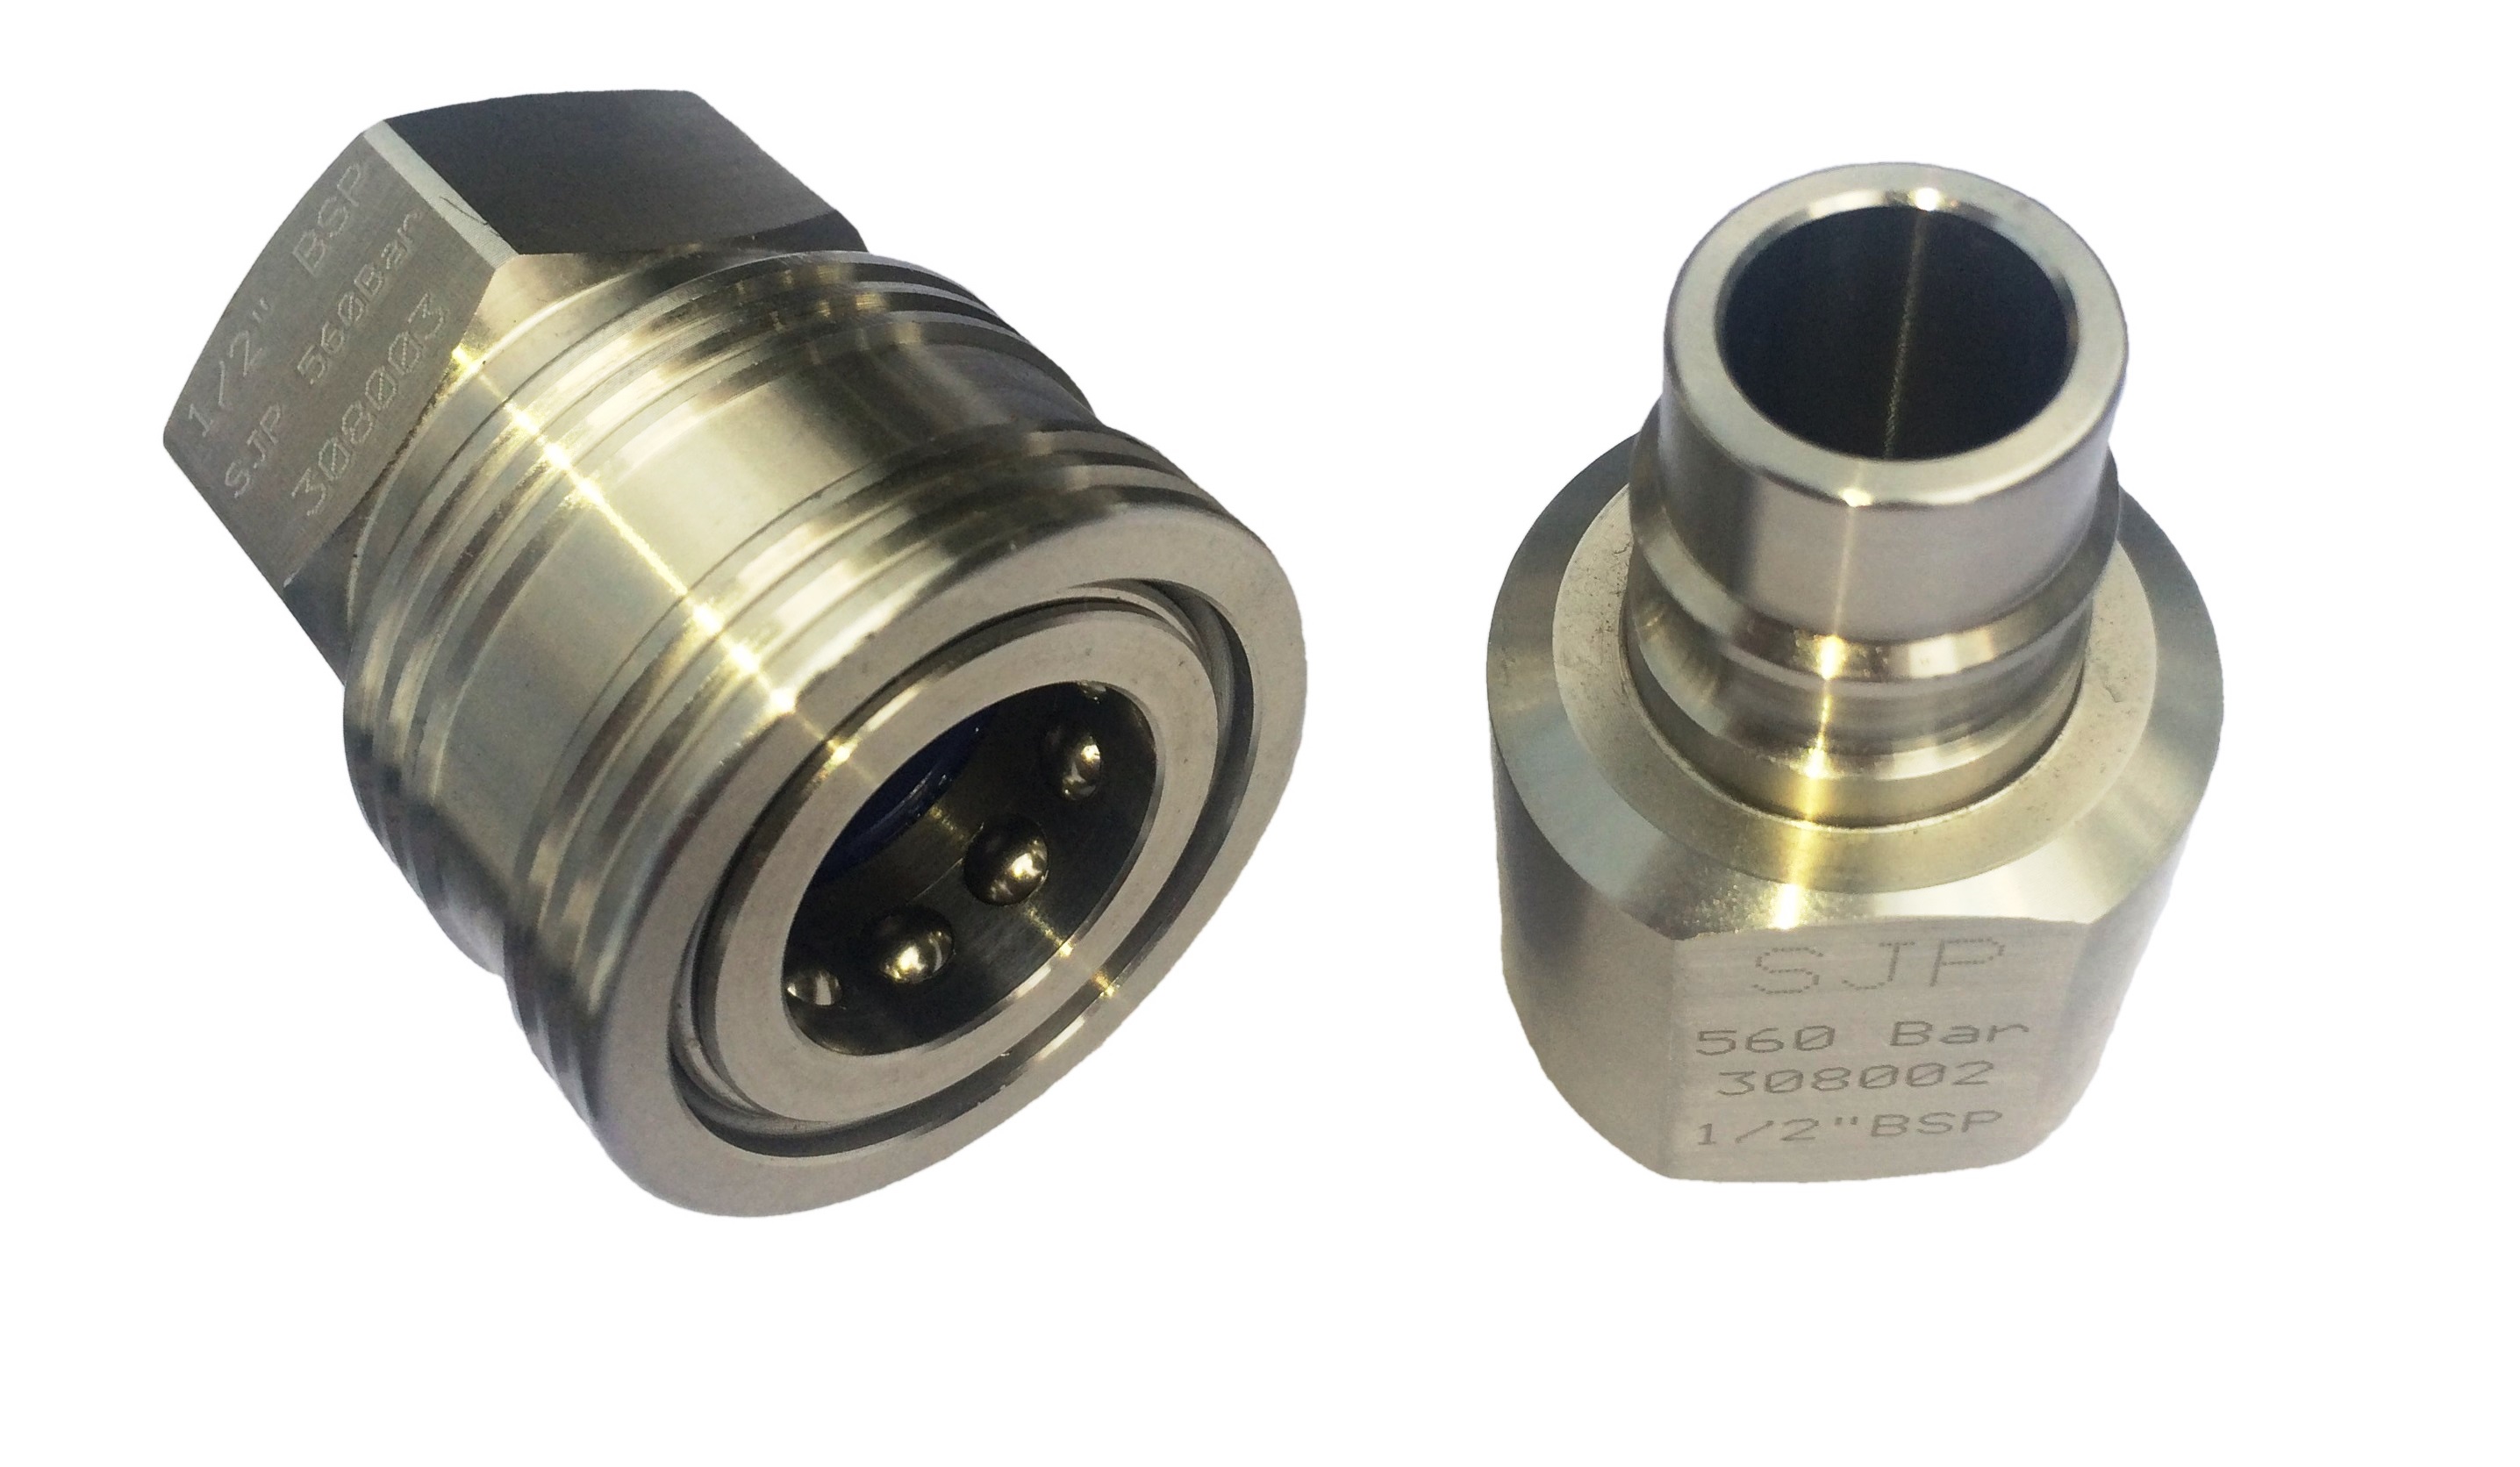 560 bar ball quick coupling for high pressure waterjet hose pic